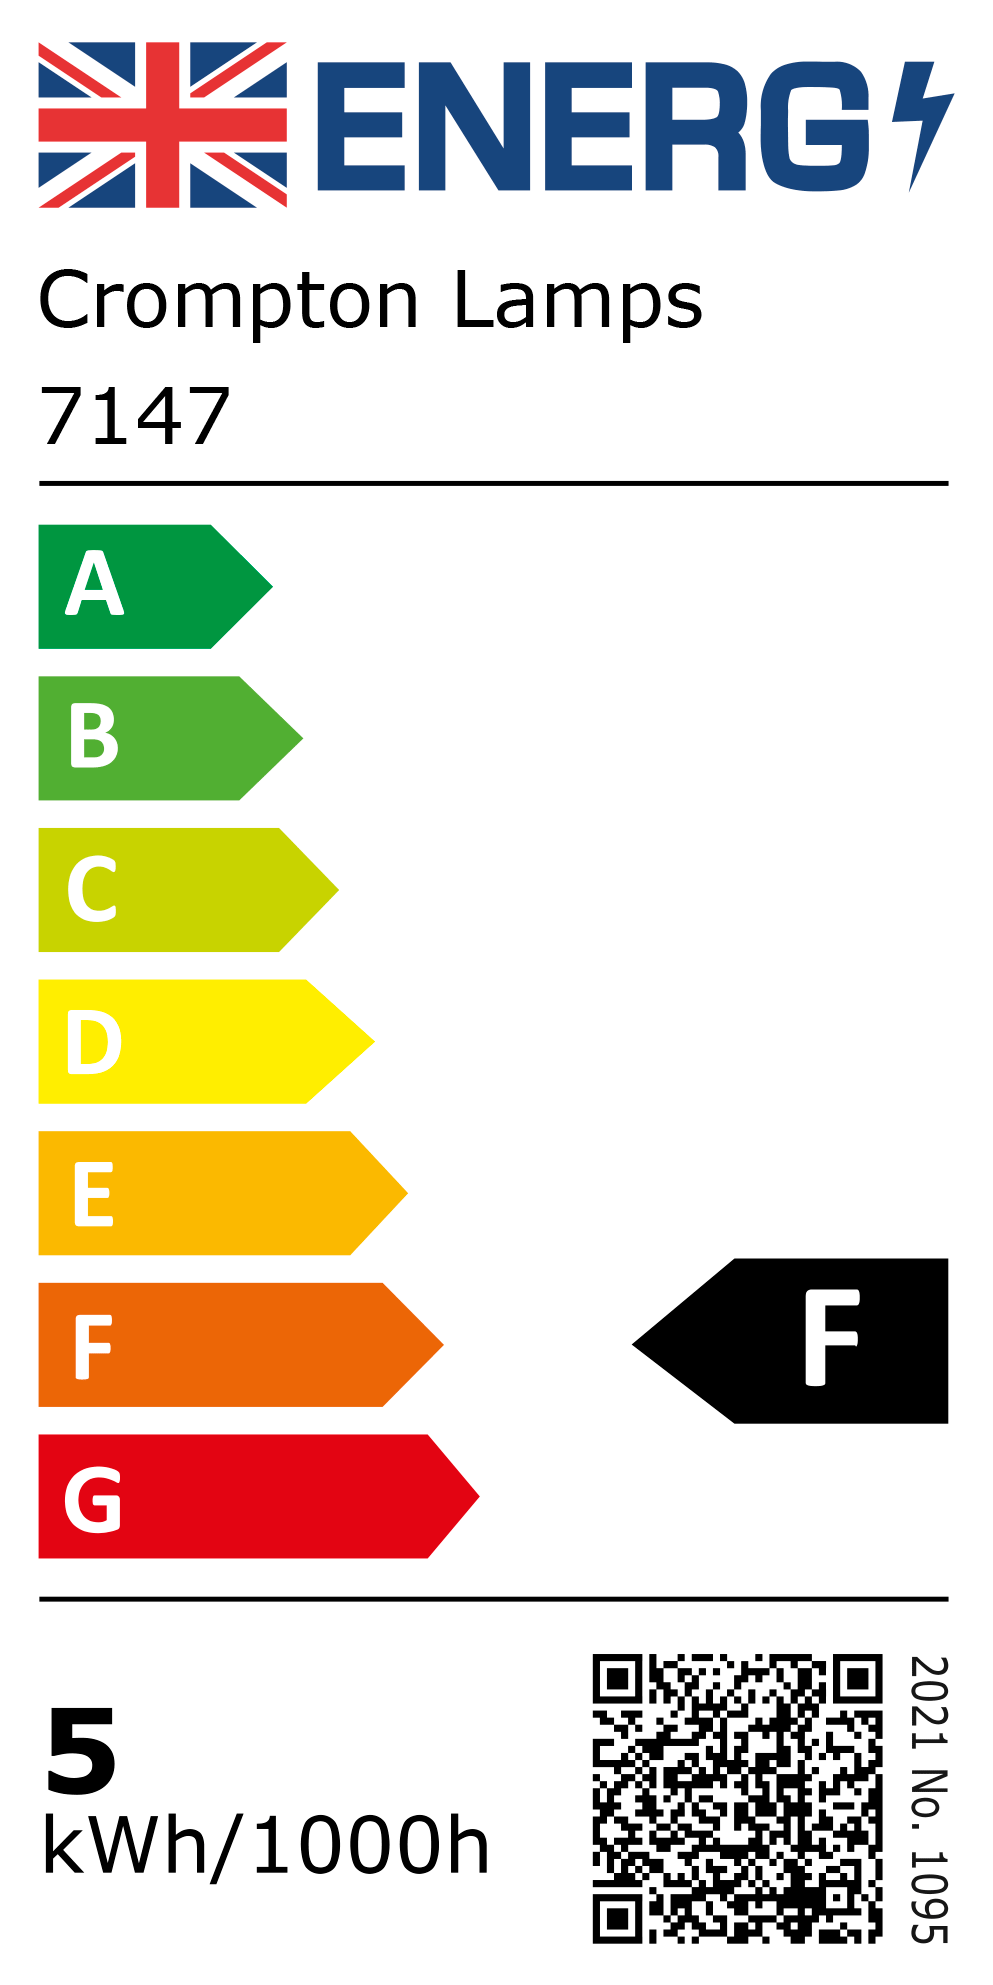 New 2021 Energy Rating Label: Stock Code 7147